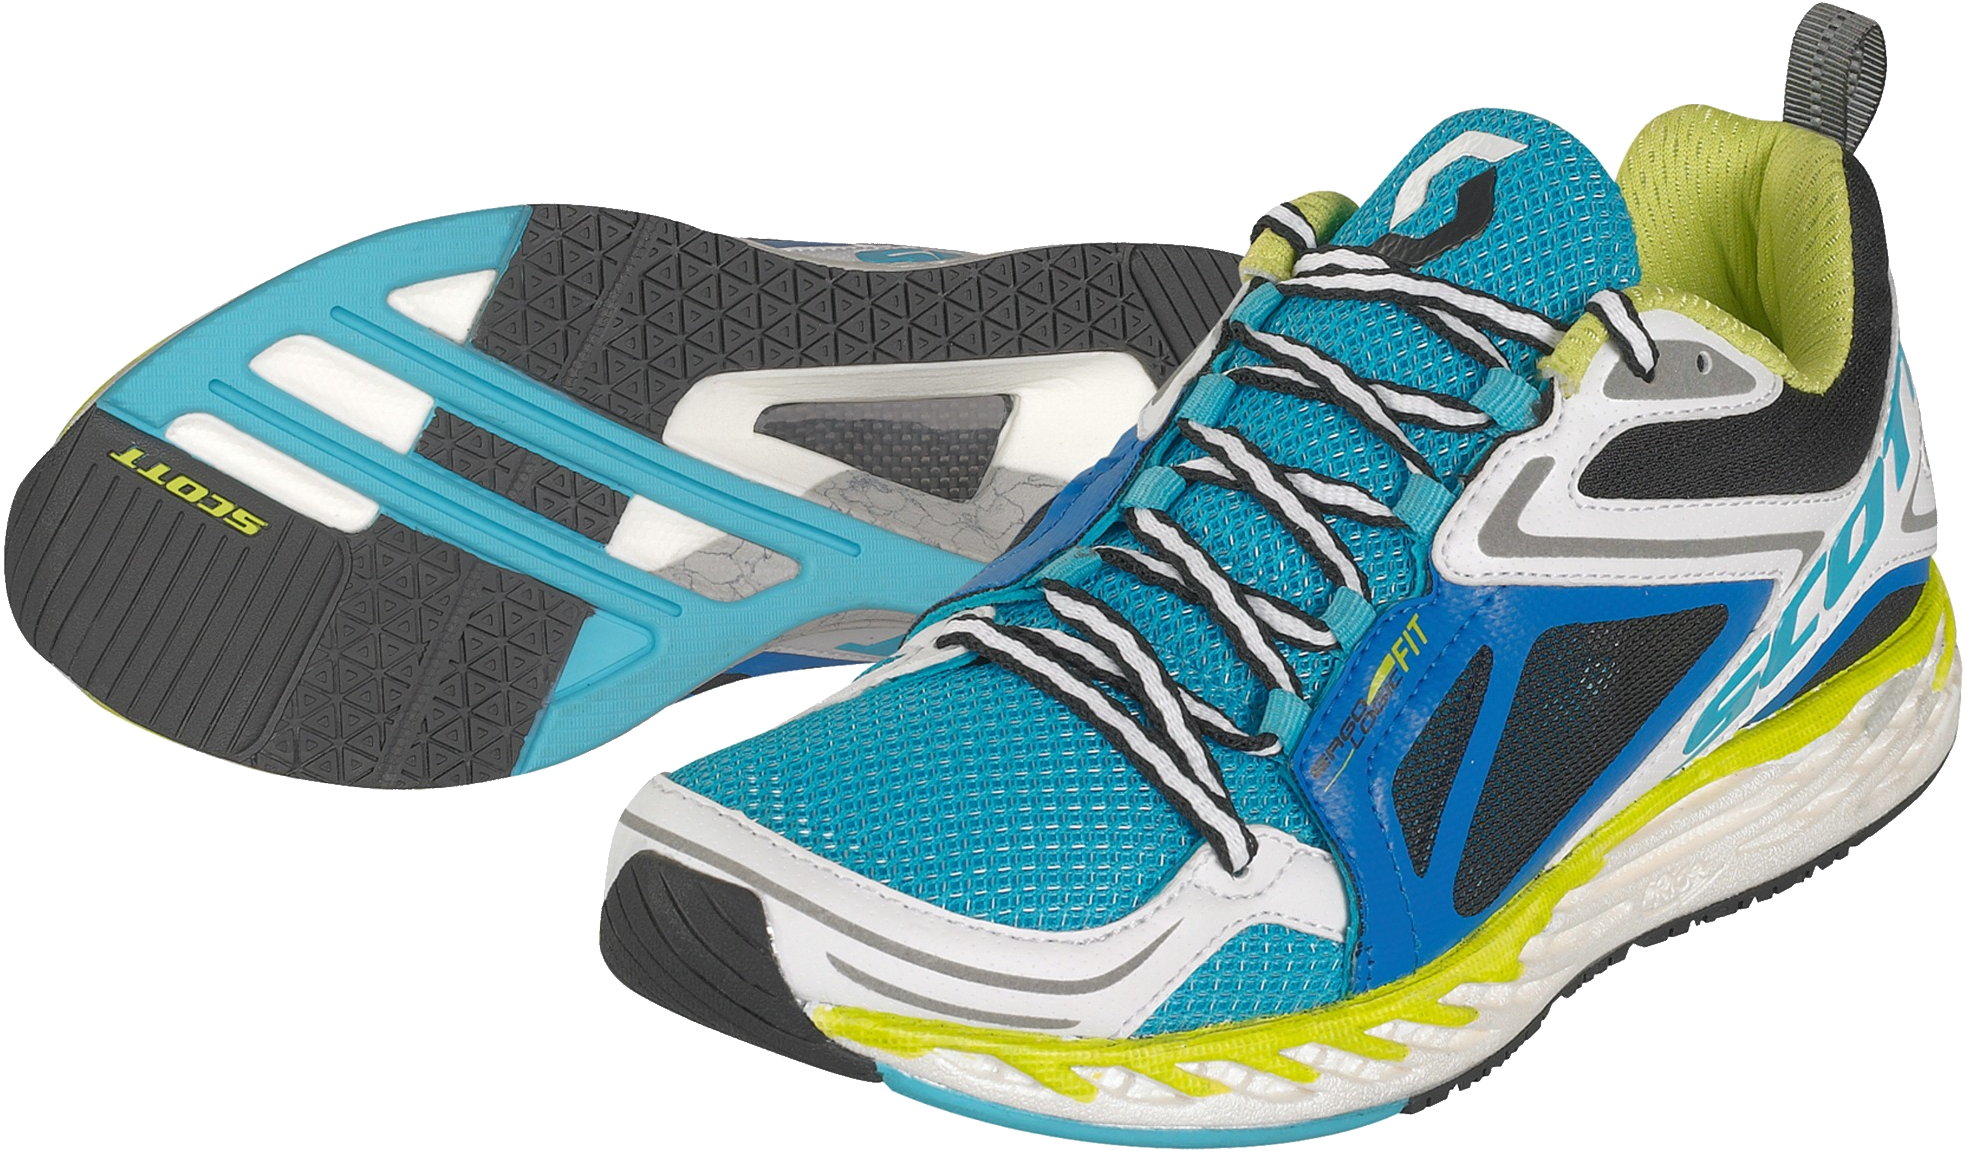 Running Shoes Png - Running Shoes Png Image, Transparent background PNG HD thumbnail